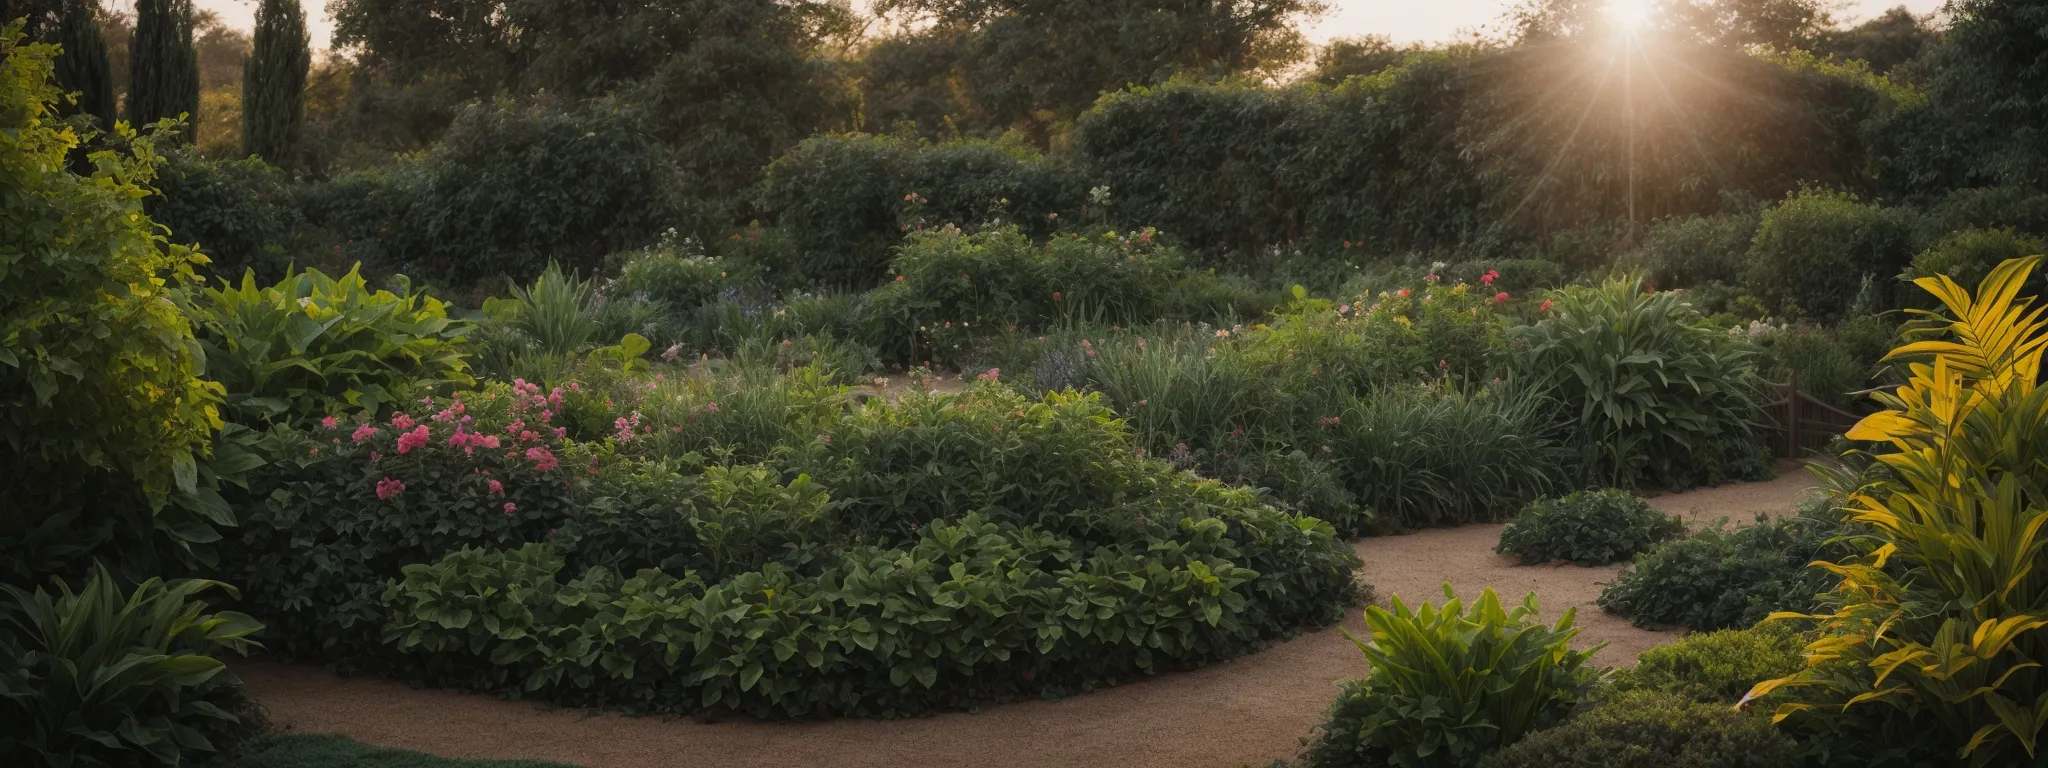 a garden overflowing with lush plants under the soft glow of sunrise, symbolizing natural growth and potential.